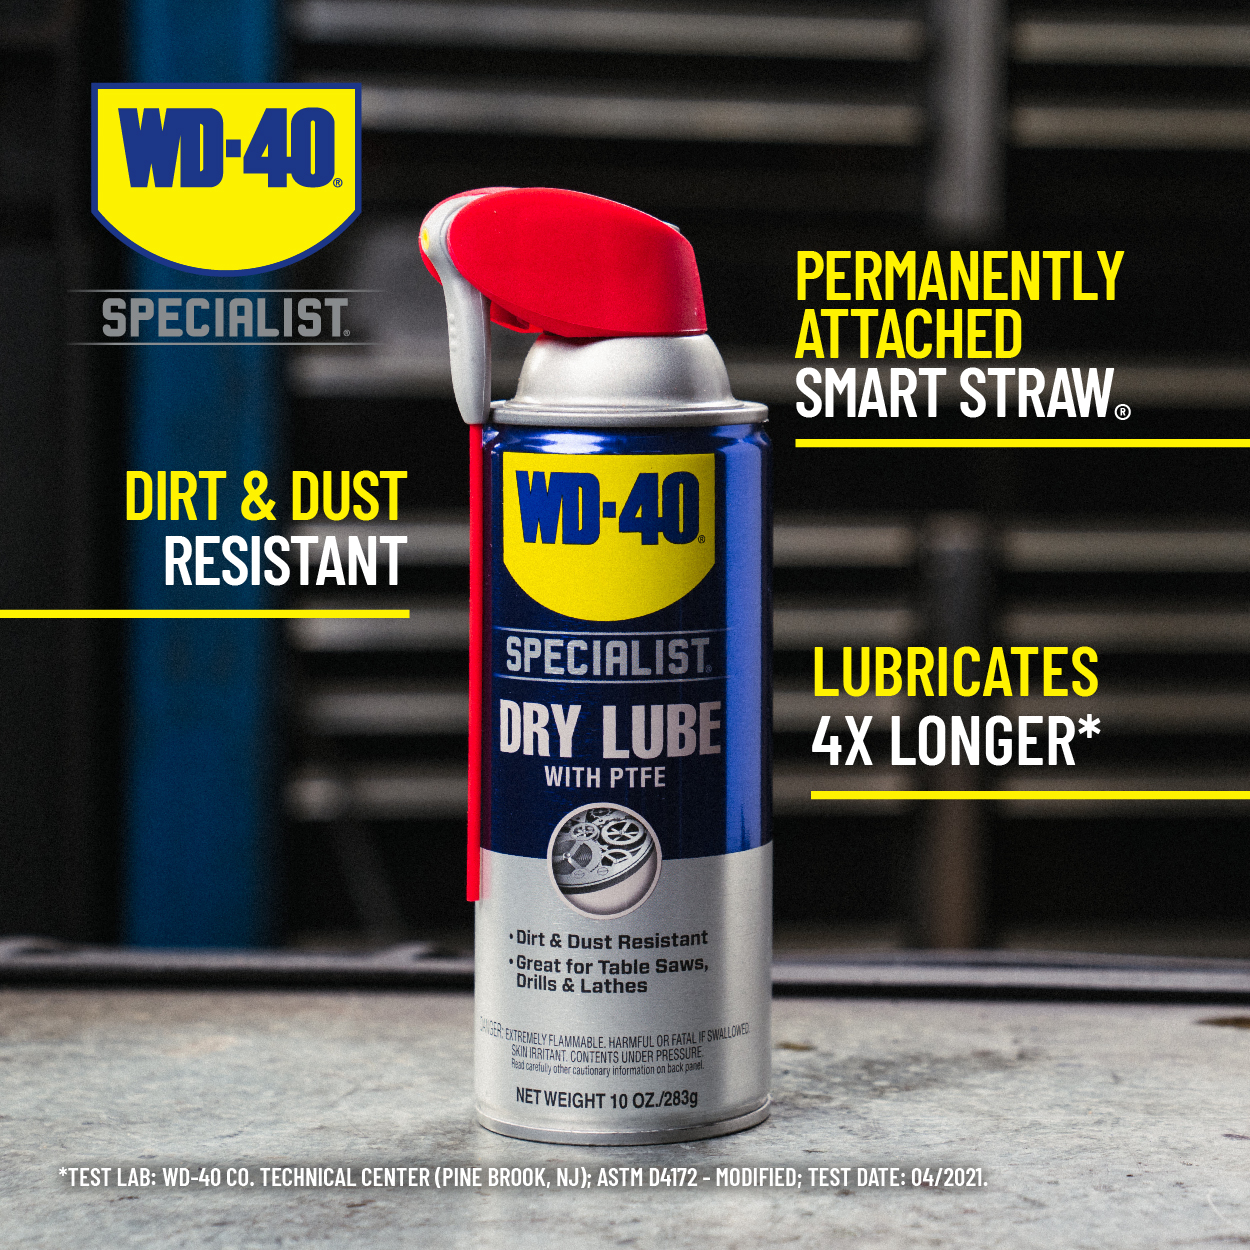 WD-40 Specialist Dry Lube with PTFE, Lubricant with Smart Straw Spray, 10 oz - image 2 of 9